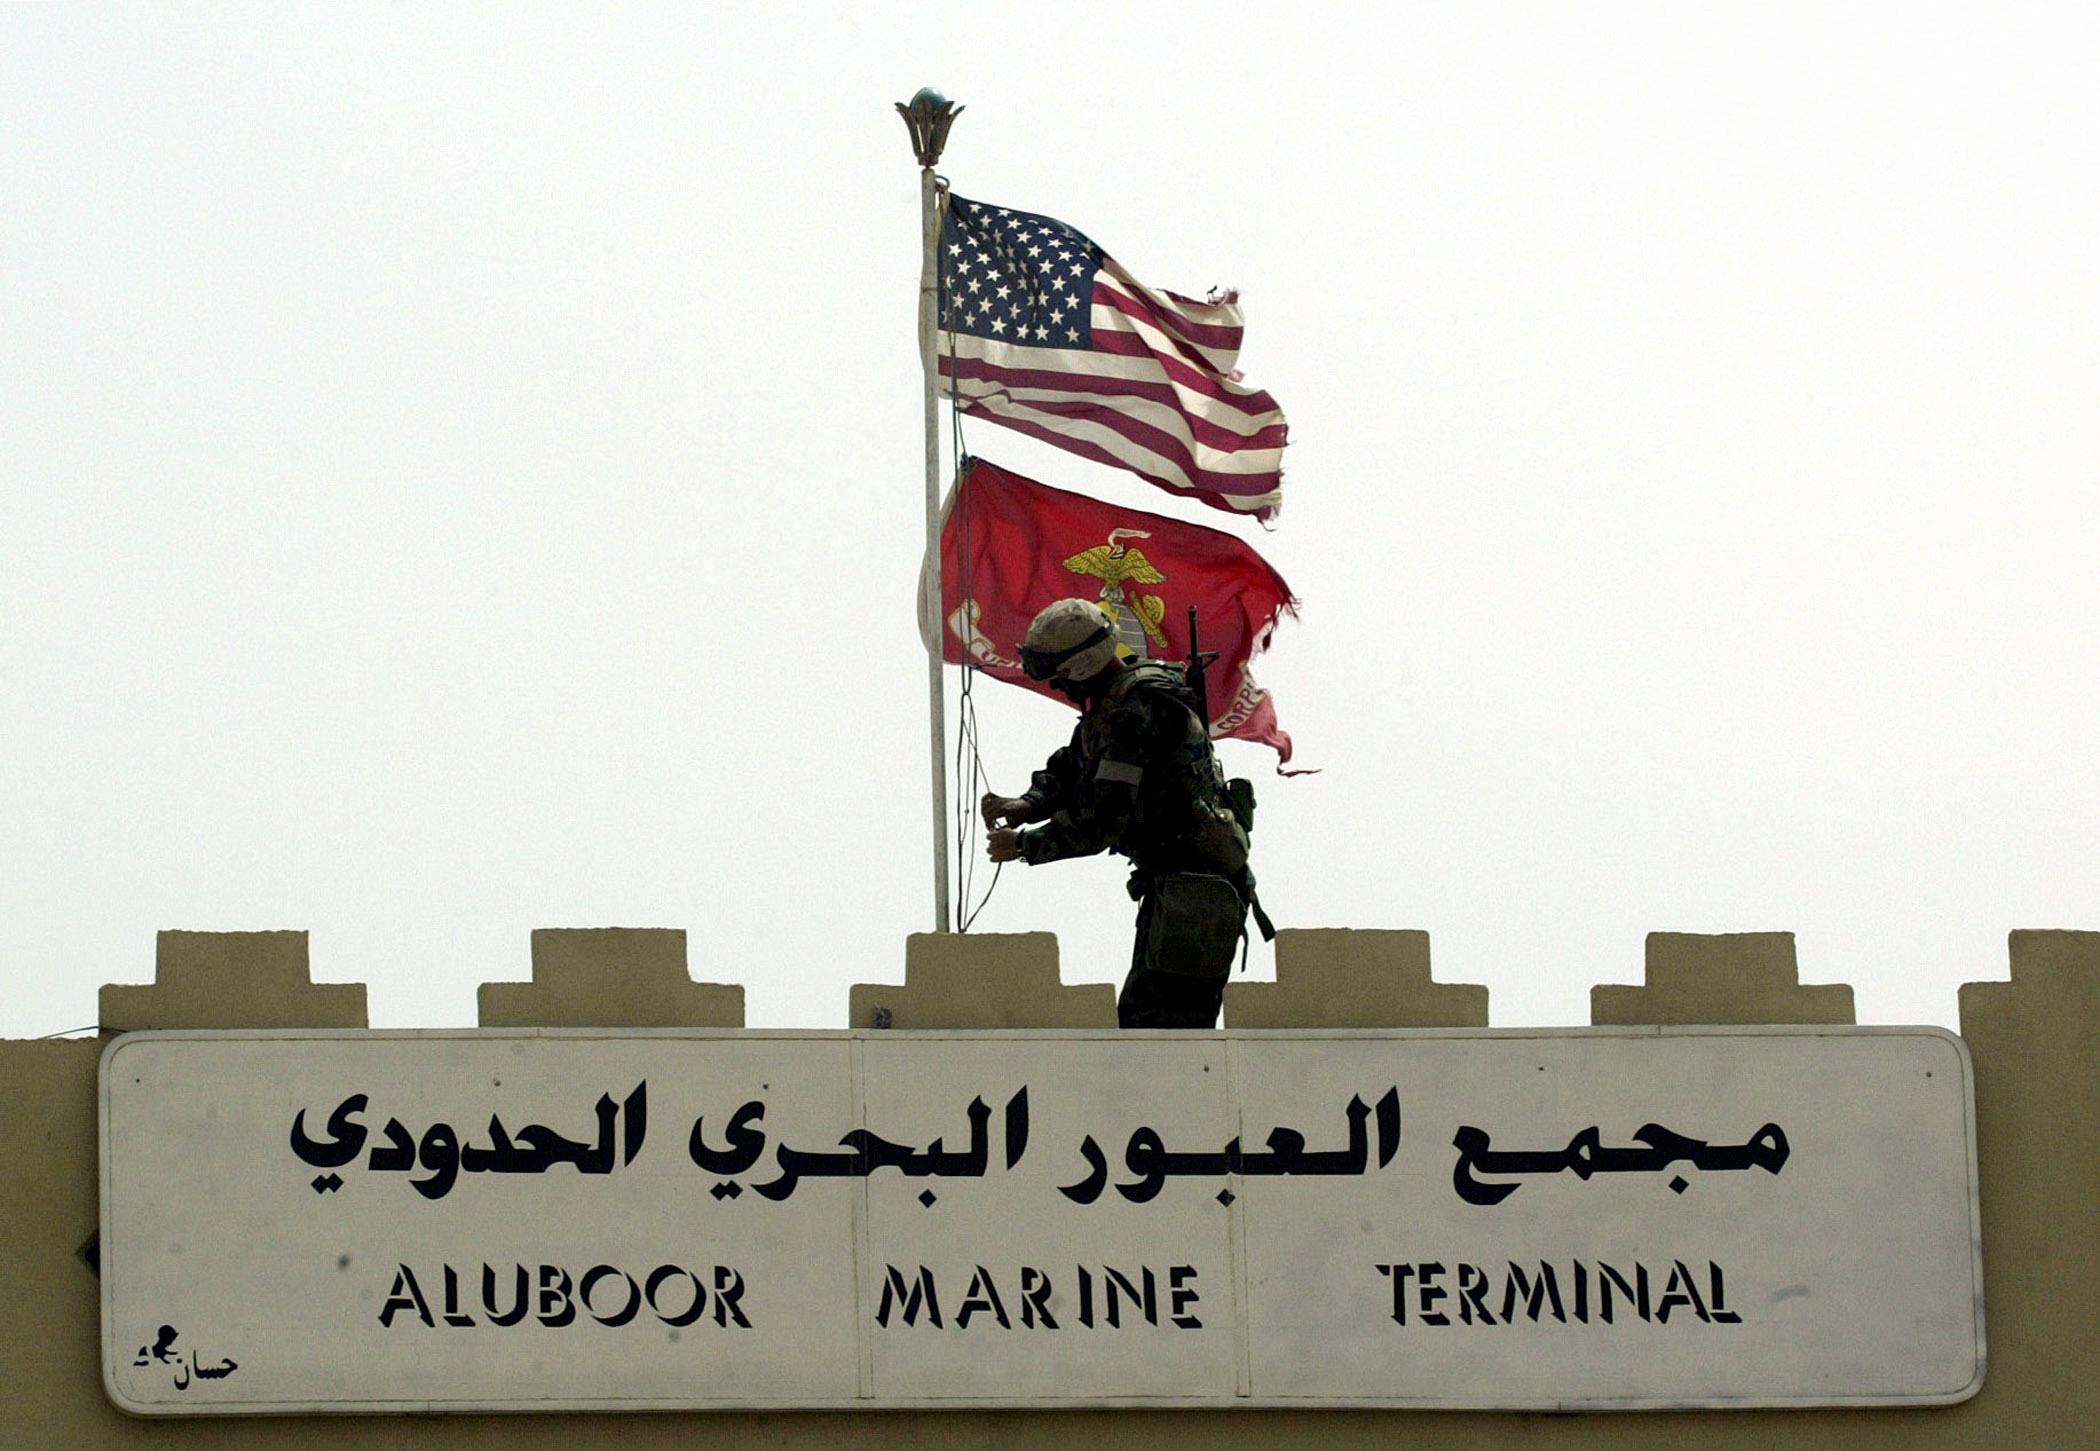 A Marine of the U.S. Marine Expeditionary Unit (MEU) Fox Company 'Raiders' replaces the Iraqi flag at the entrance to Iraq's main port of Umm Qasr on March 21, 2003 